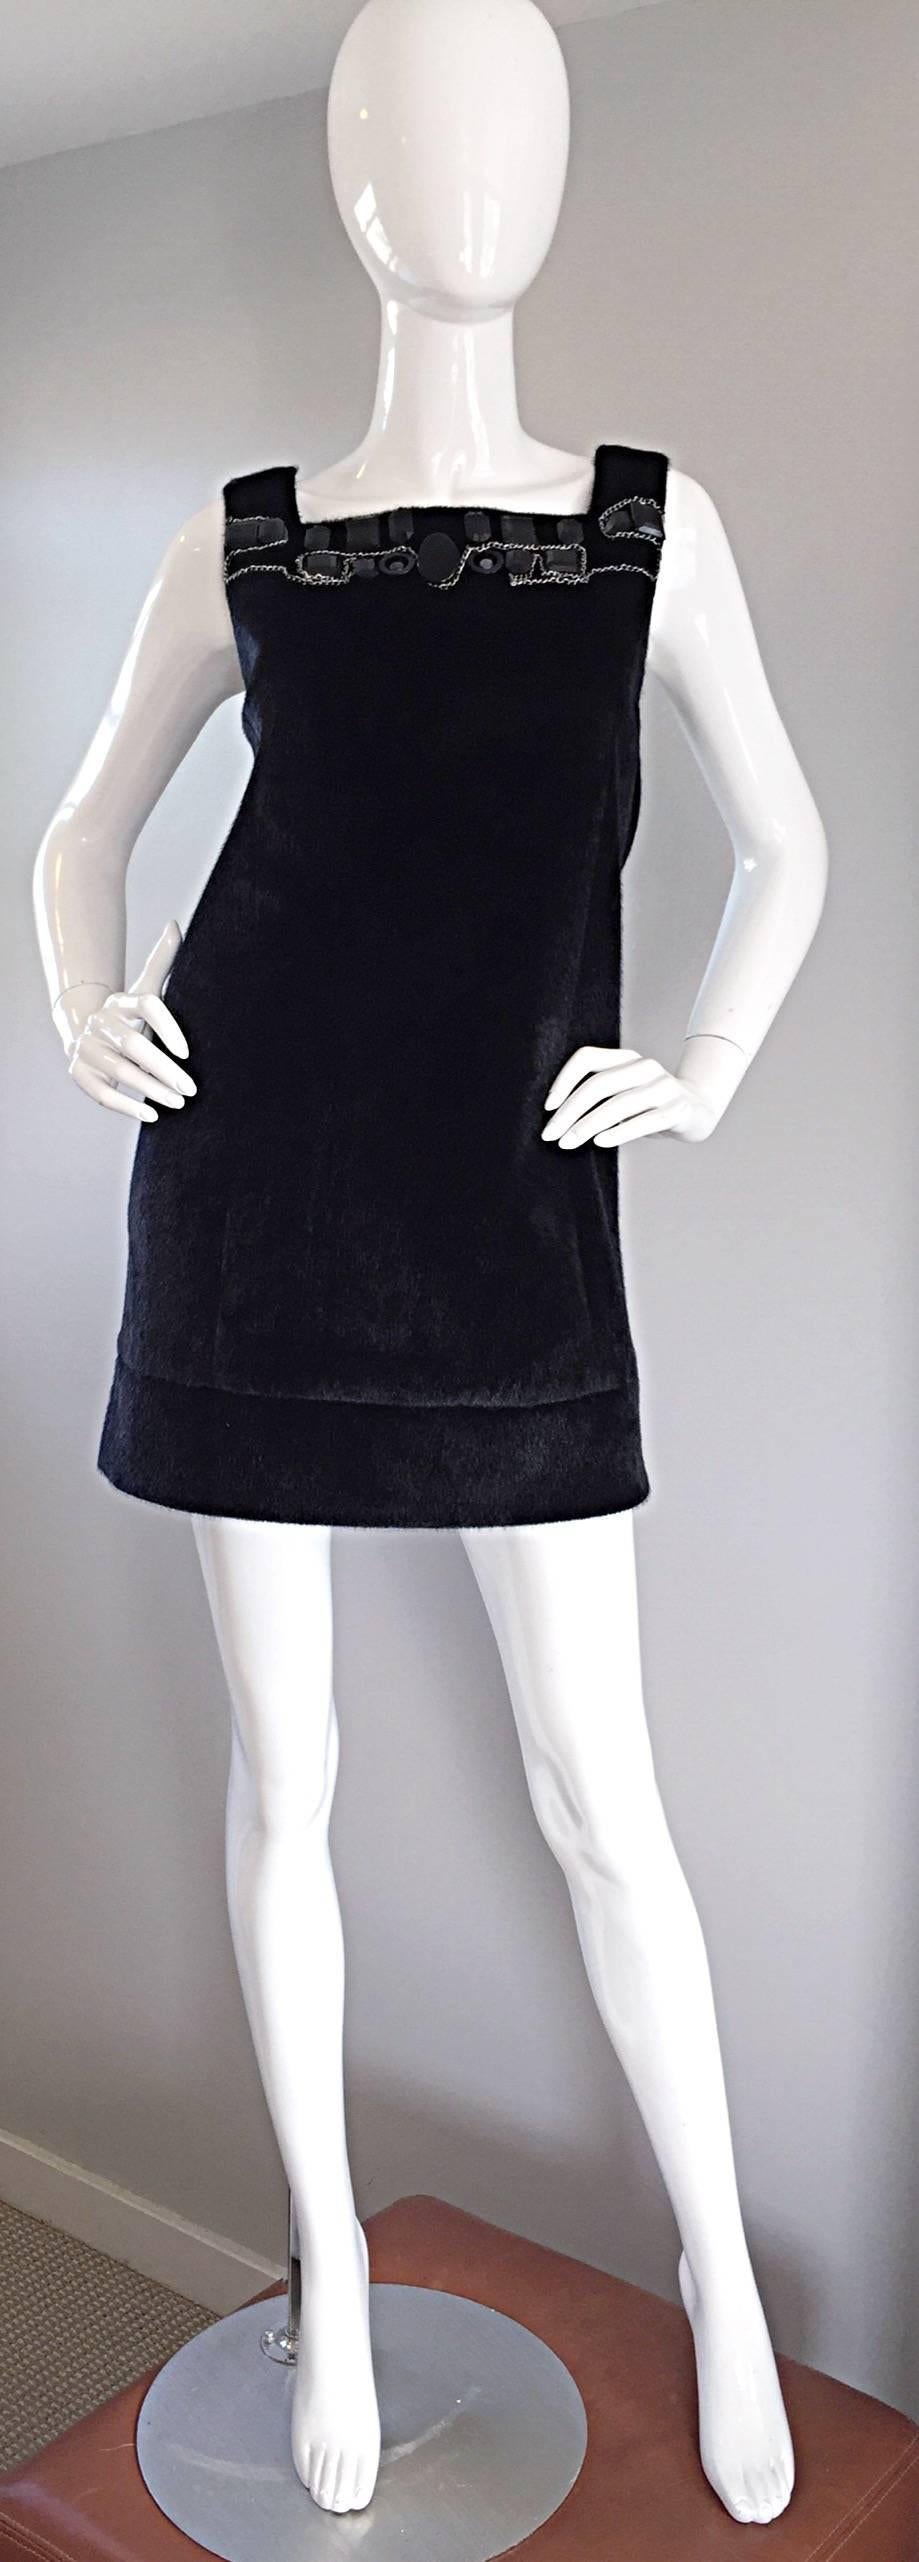 Fantastic vintage 90s faux fur designer dress! Made in Italy, this beautiful dress consists of all-over faux fur, with beads mingled with silver chains at bust. Flattering shift style, that can easily carry you from day to night. The perfect little